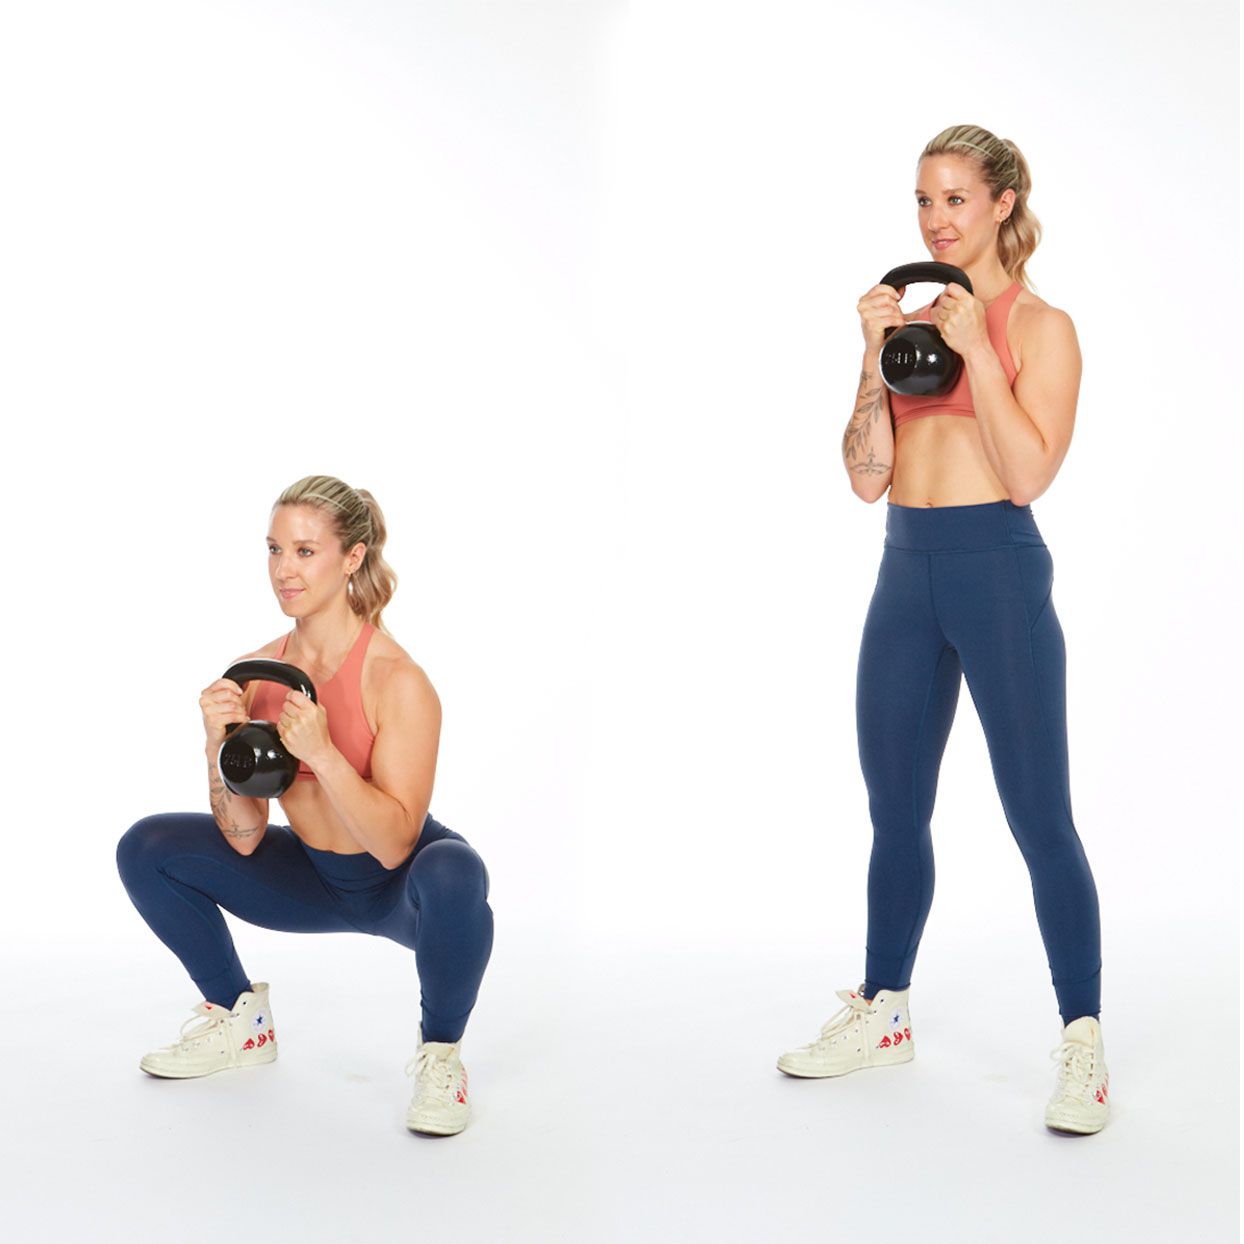 
                             	Stand with feet hip-width apart, holding the kettlebell with both hands at your chest. Draw shoulders down and back.
                             	Keeping chest lifted, bend knees and shift hips back to lower into a squat (lower hips until thighs are parallel to the ground).
                             	Press heels into the floor and engage your glutes to return to standing.
                            <p>Do 10 reps.</p><p>Kettlebell workout tip: Make sure knees are pressed out or pointing straight ahead the entire time, not buckling in.</p>